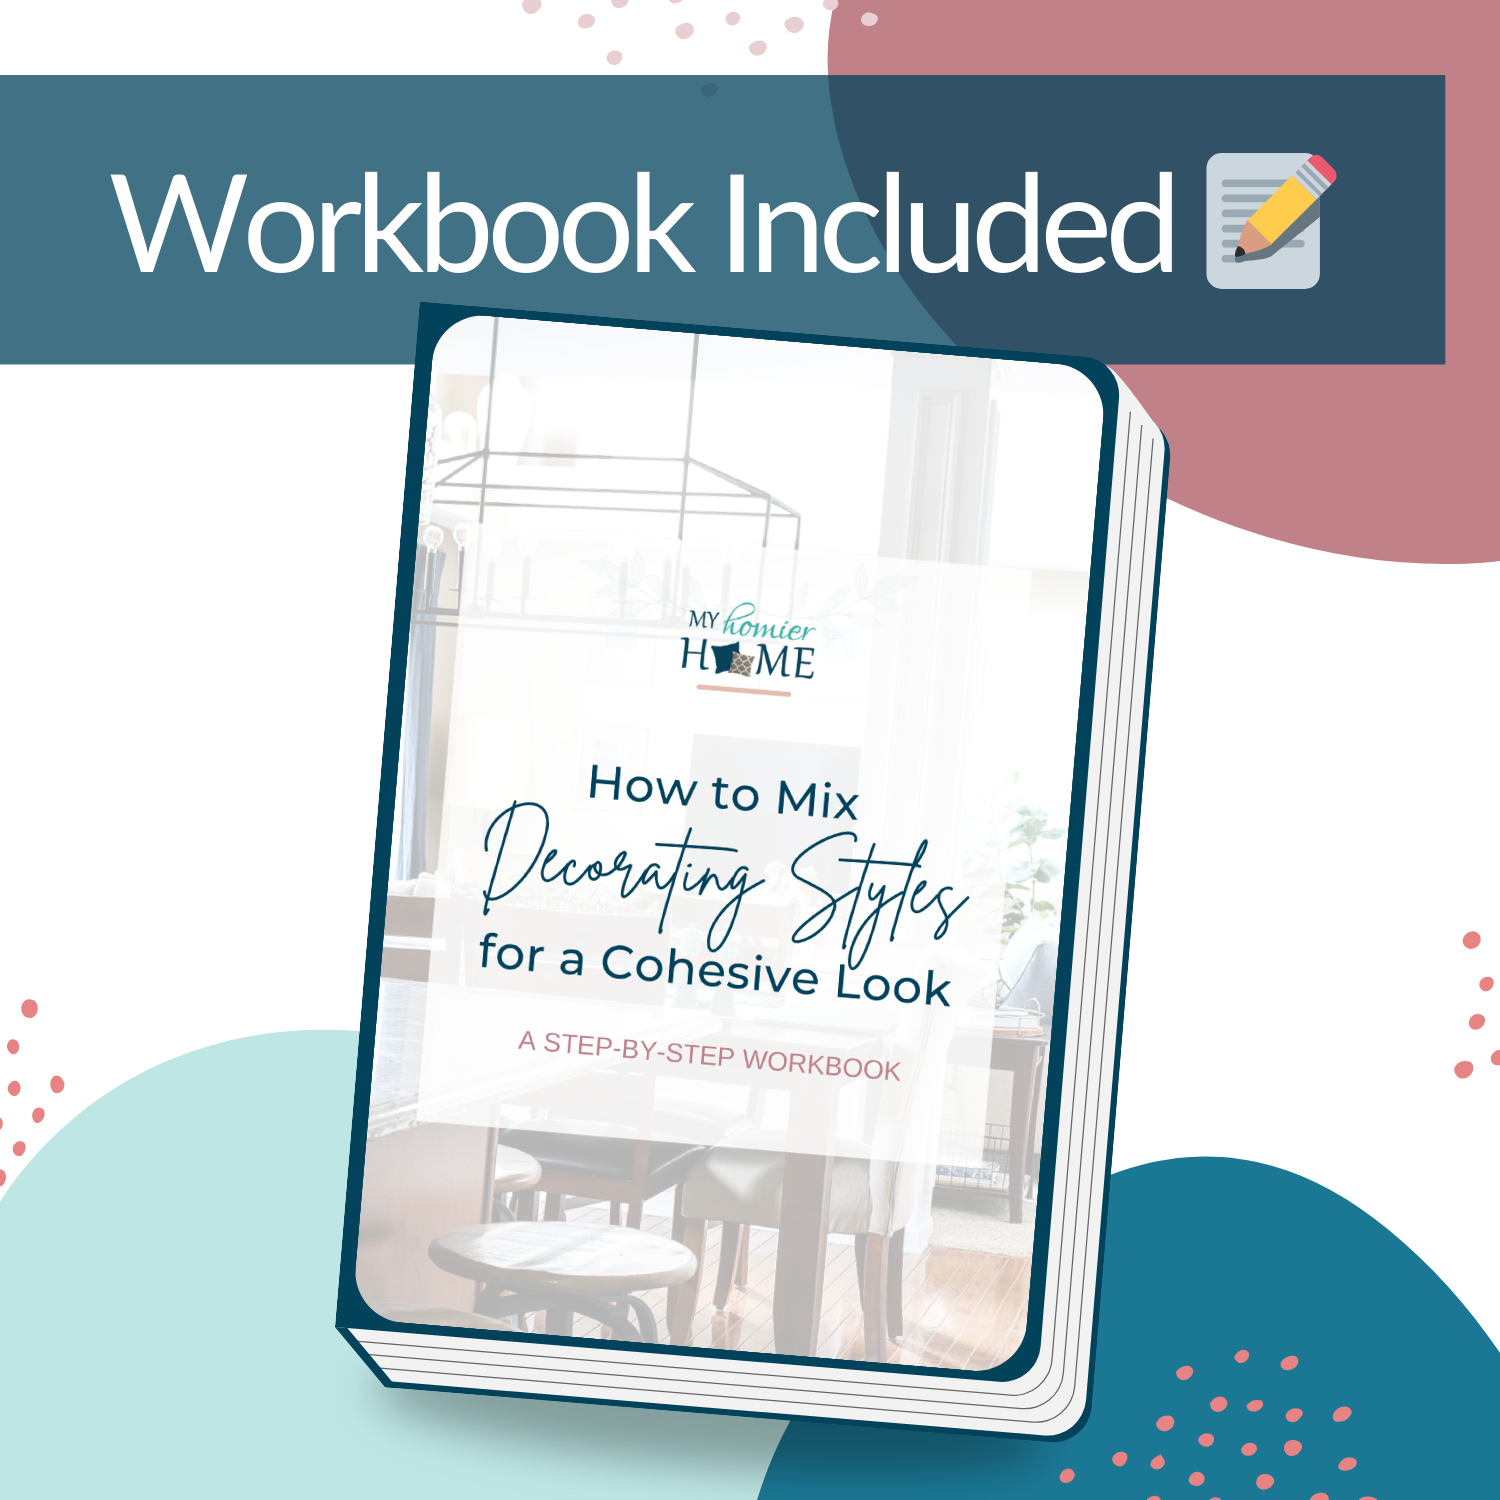 How to mix styles for a cohesive look - My Homier Home Home Decorating Starter Kit workbook included.